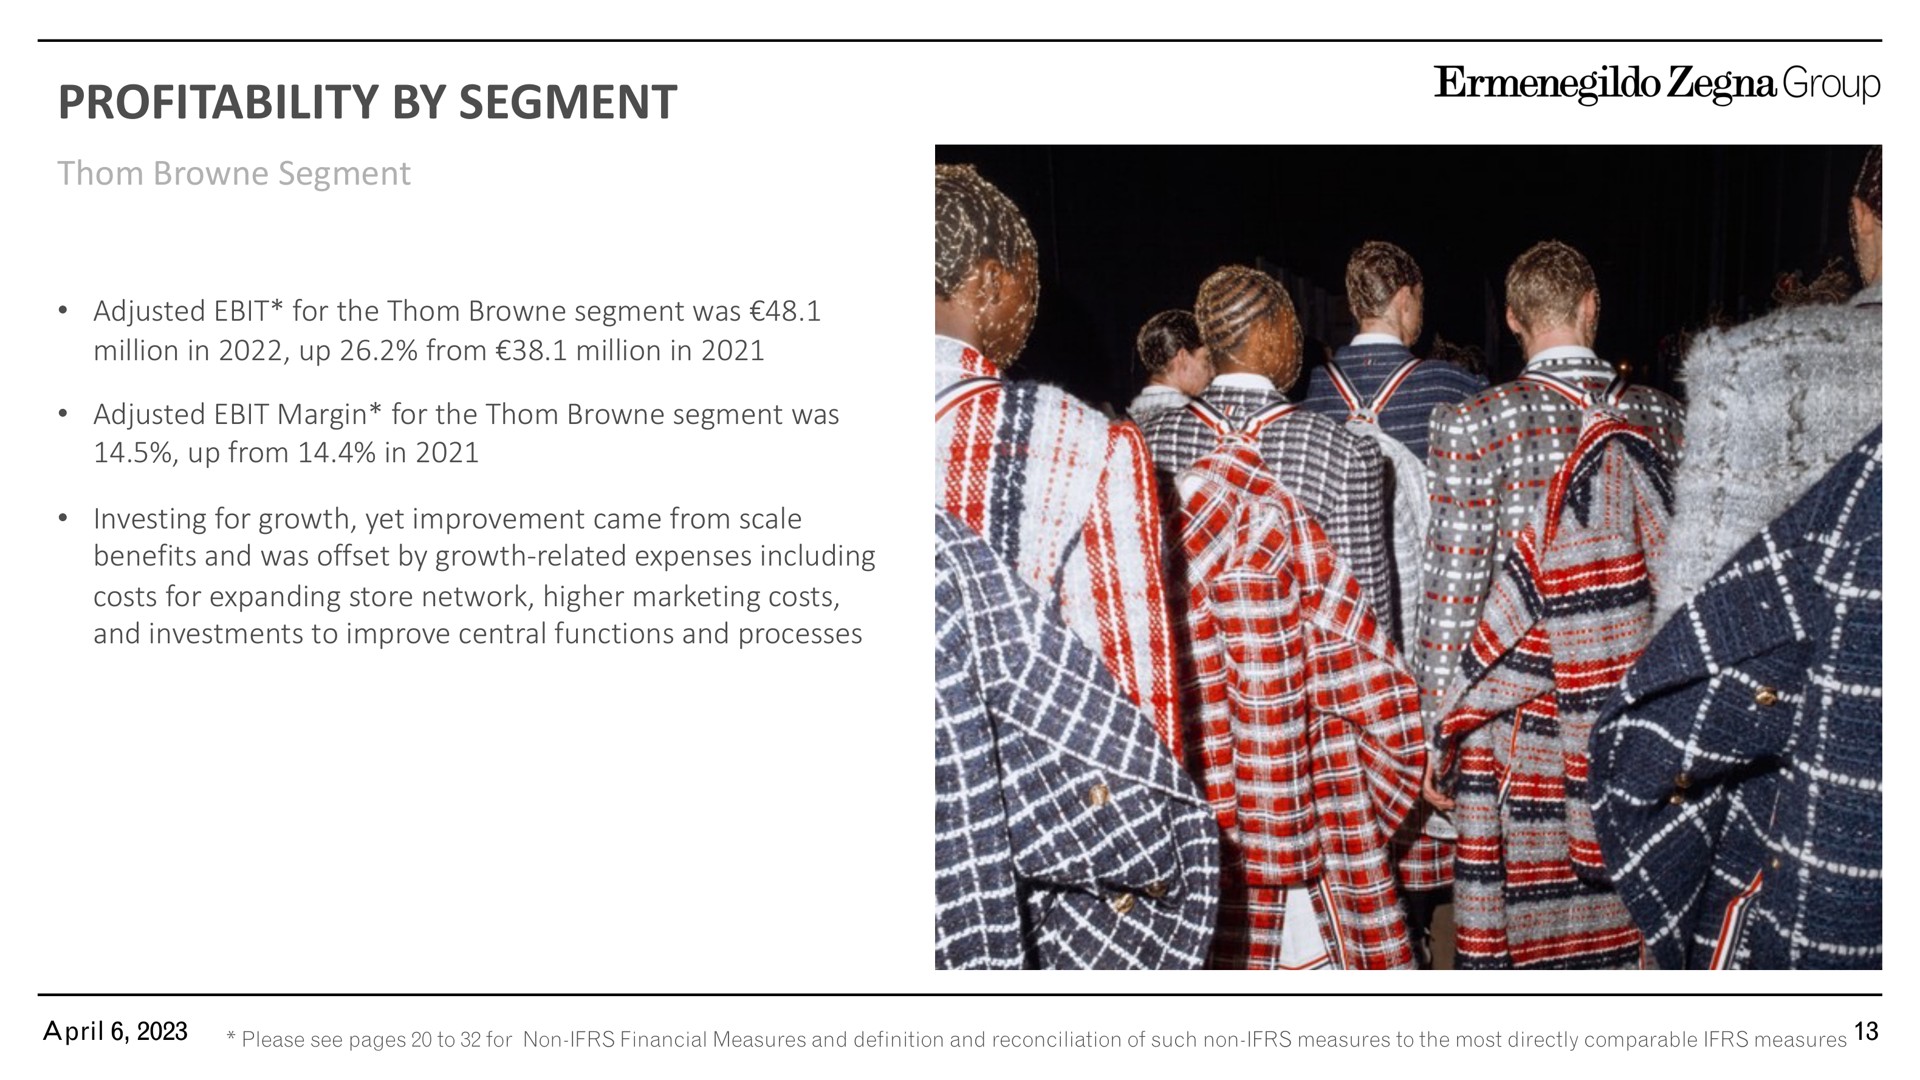 profitability by segment segment adjusted for the segment was million in up from million in adjusted margin for the segment was up from in investing for growth yet improvement came from scale benefits and was offset by growth related expenses including costs for expanding store network higher marketing costs and investments to improve central functions and processes group | Zegna